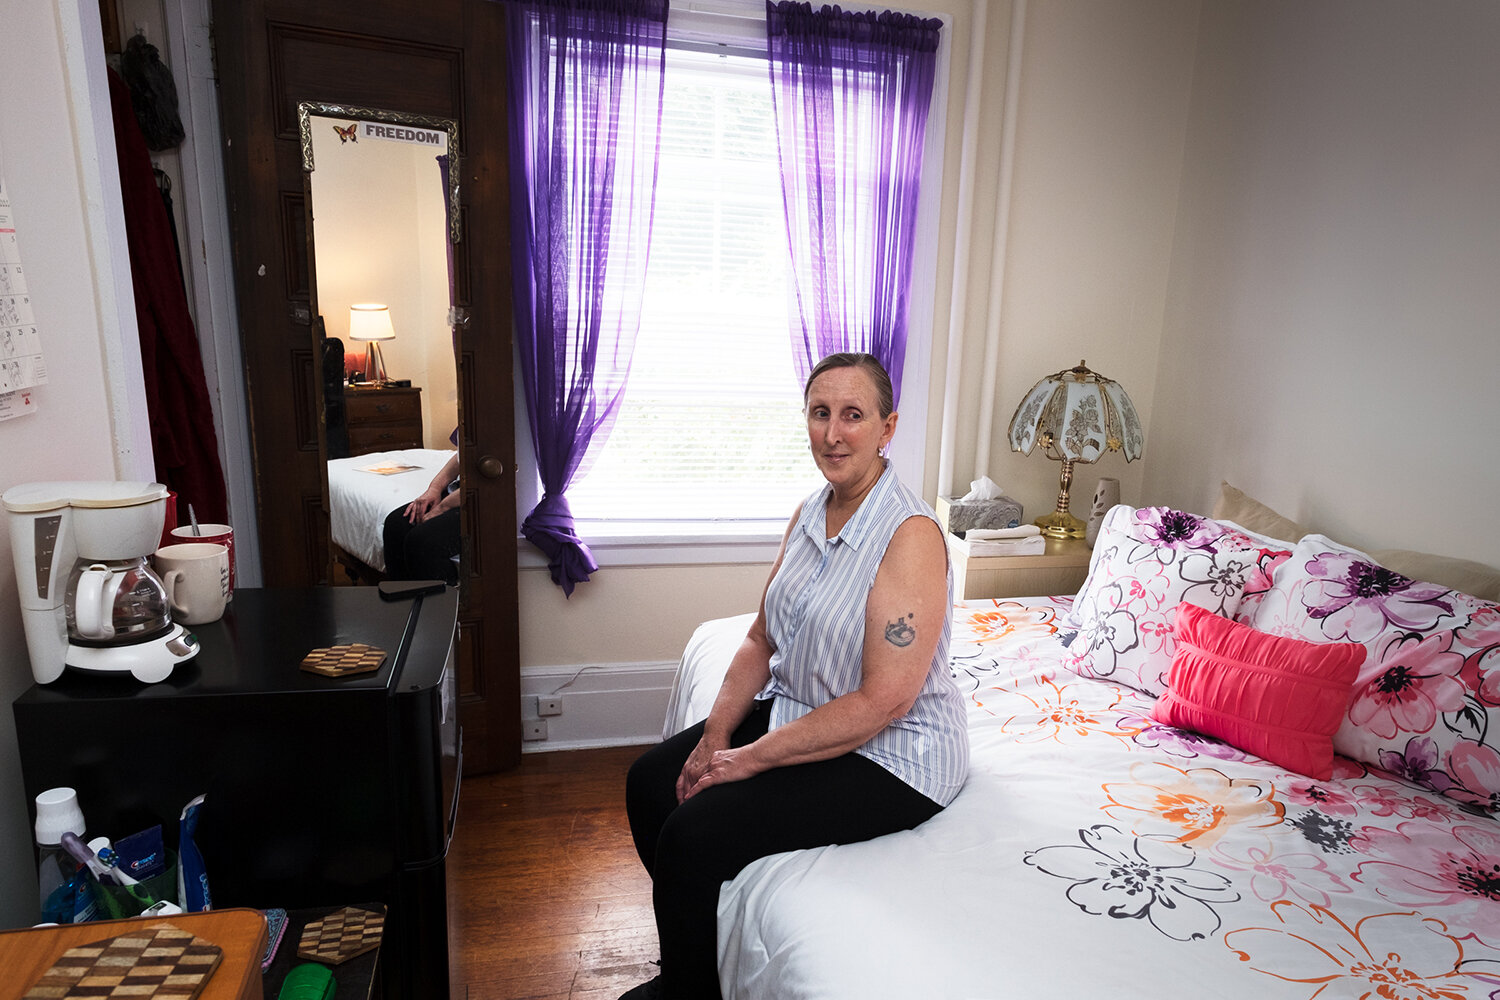  Louise, 60, in a house she shares with five other women, five years after her release. Flushing, NY, 2017. Image © Sara Bennett. 